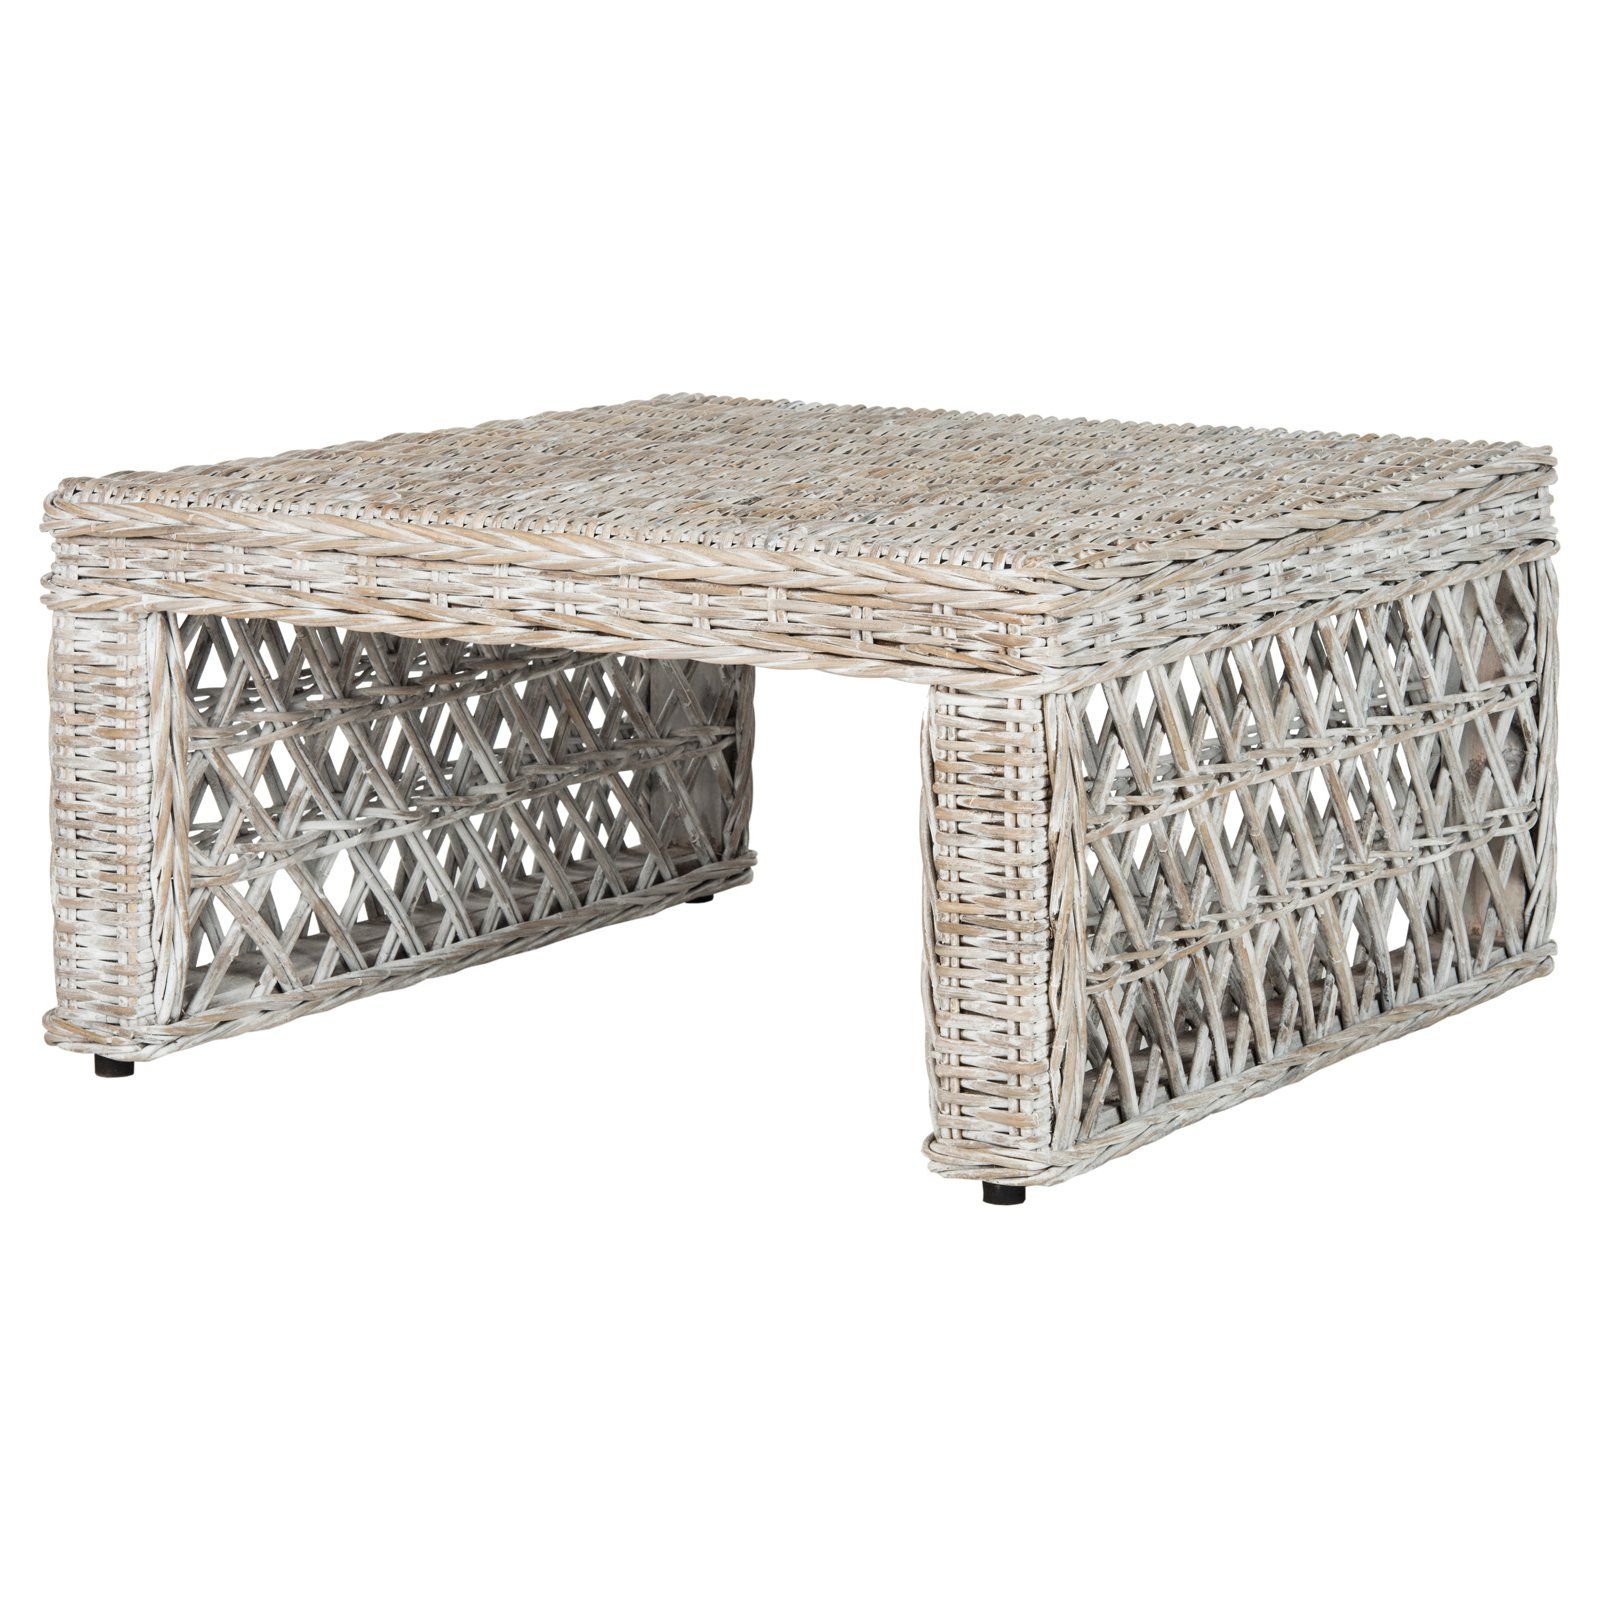 Safavieh Shila Wicker Coffee Table, Natural – Walmart – Walmart Within Most Up To Date Wicker Coffee Tables (View 9 of 10)